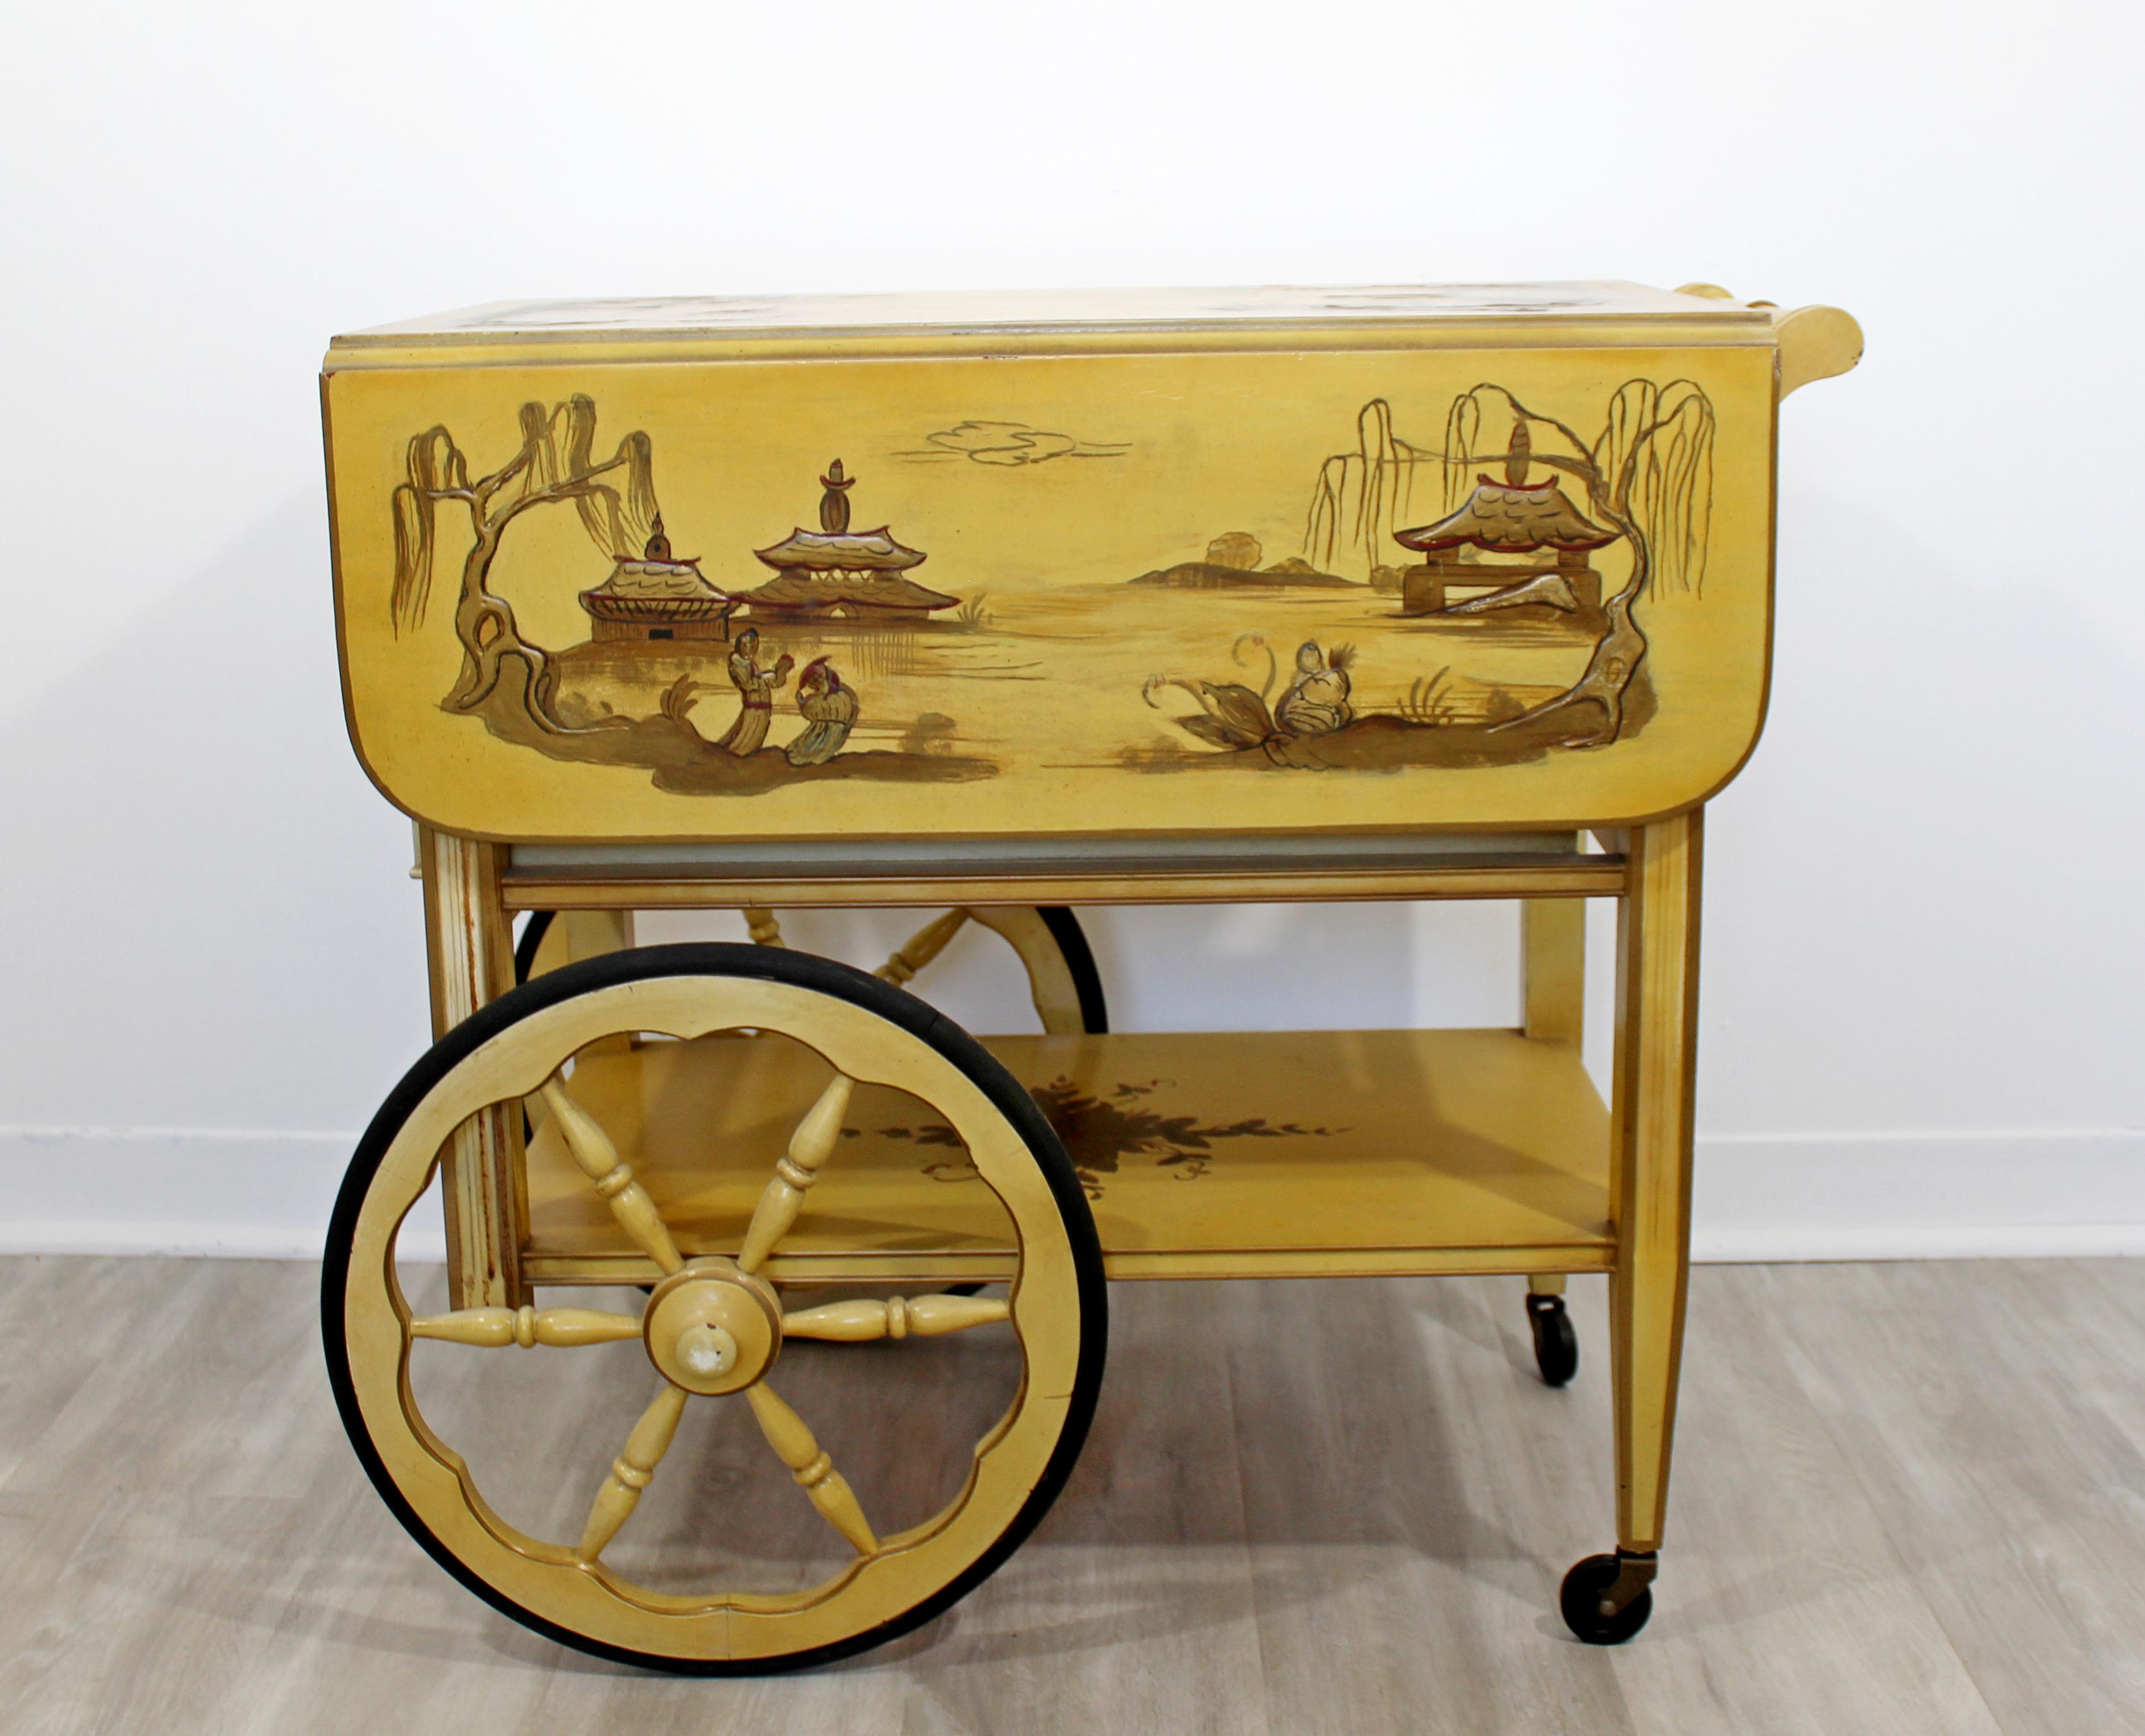 For your consideration is a chinoiserie painted, wood bar, tea serving cart, with a removable tray top, and two wings. Attributed to Dorothy McGuire. In very good vintage condition. The dimensions are 28